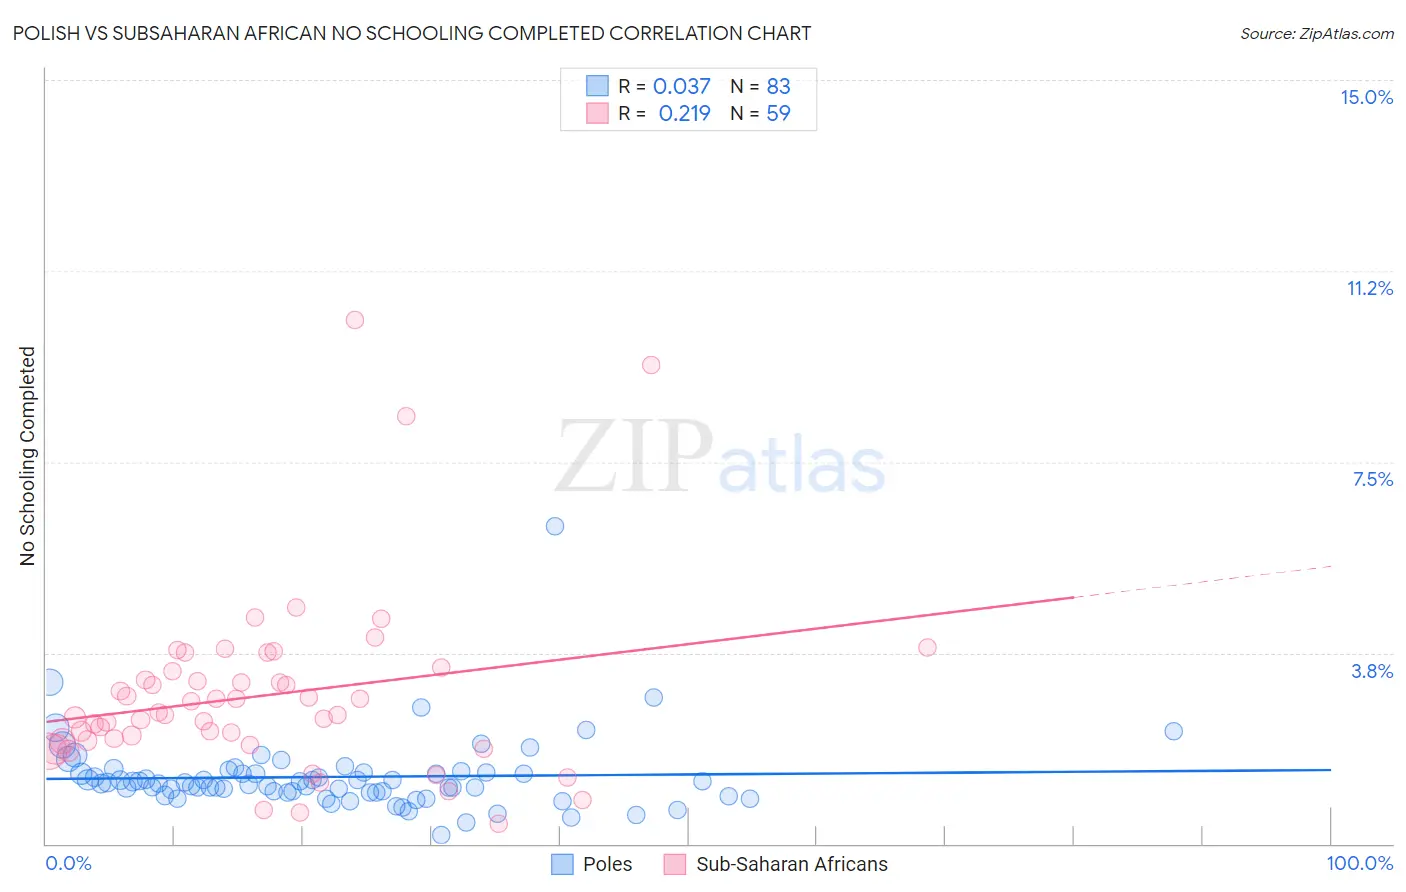 Polish vs Subsaharan African No Schooling Completed